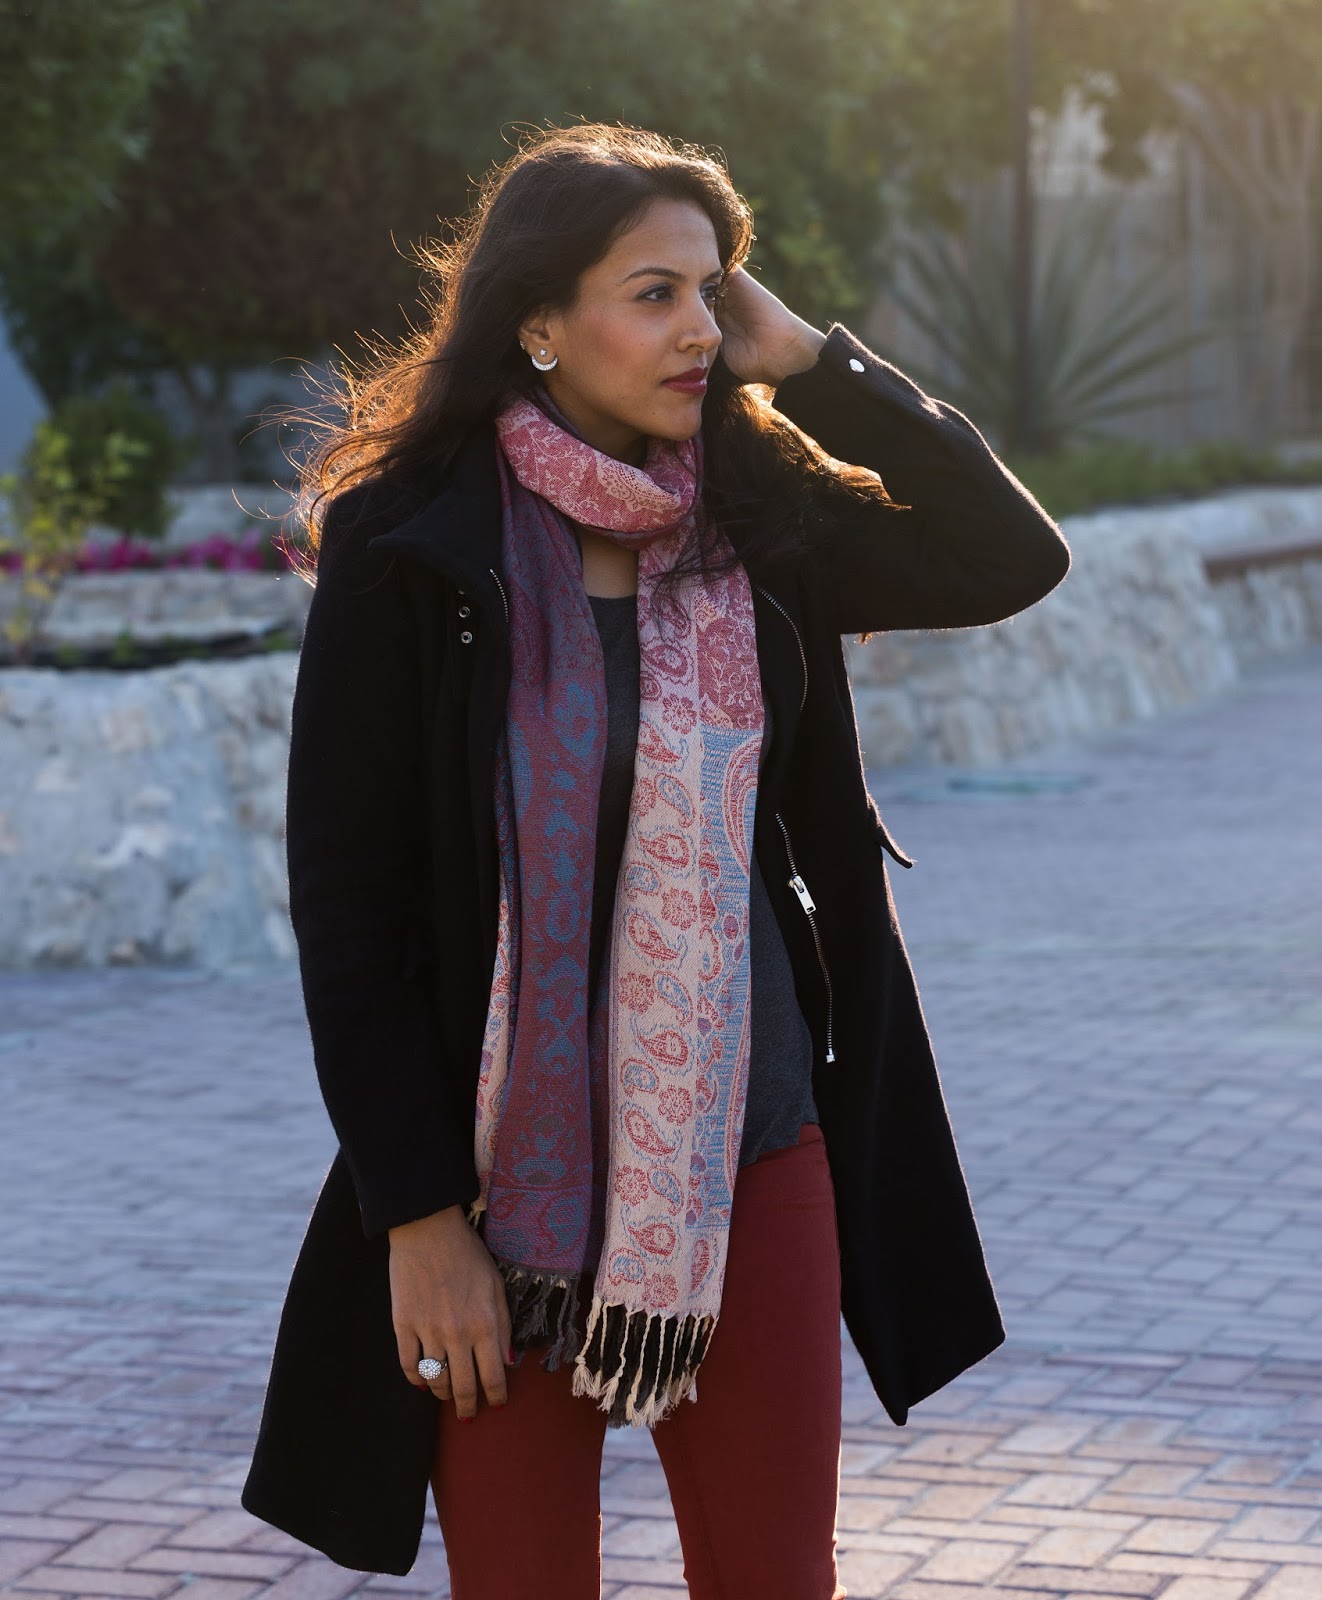 Scarf + Coat + Jeans + Boots = Warm | The Silver Kick Diaries